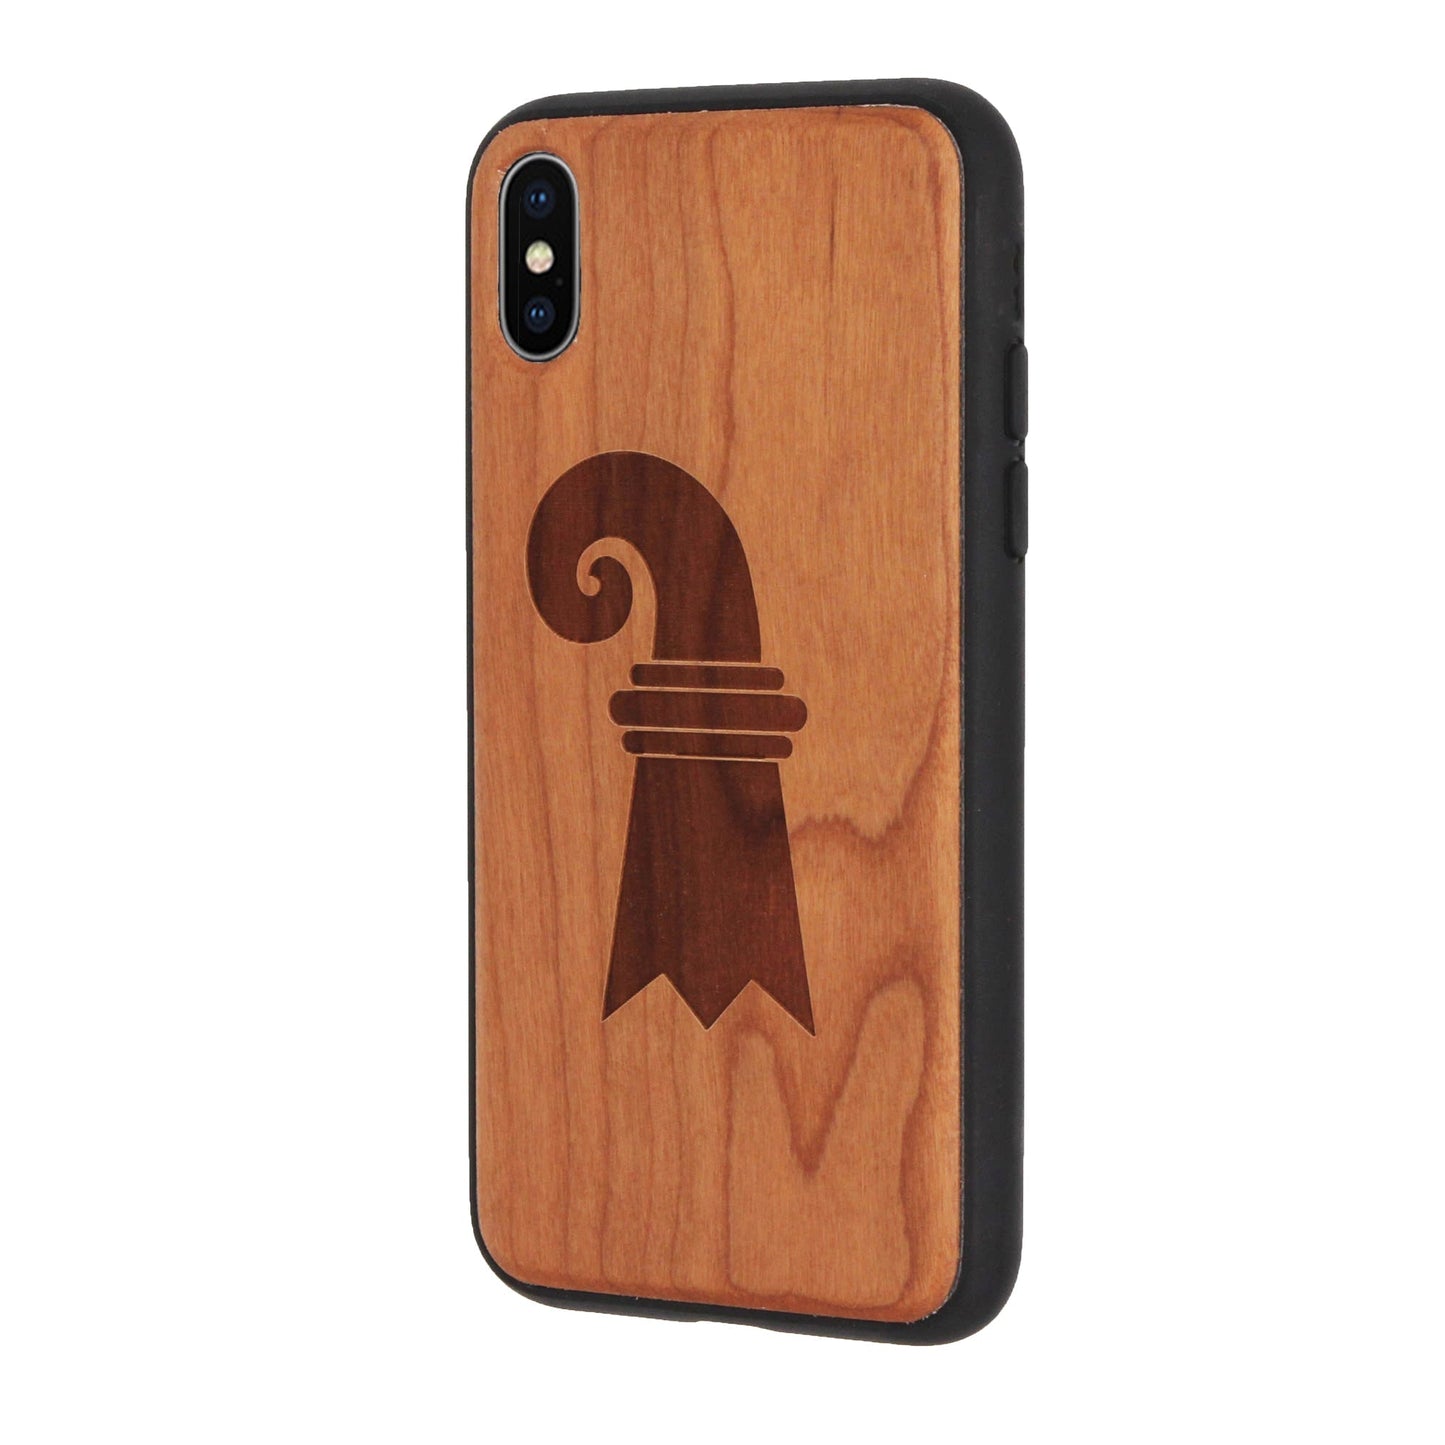 Baslerstab Eden case made of cherry wood for iPhone XS Max